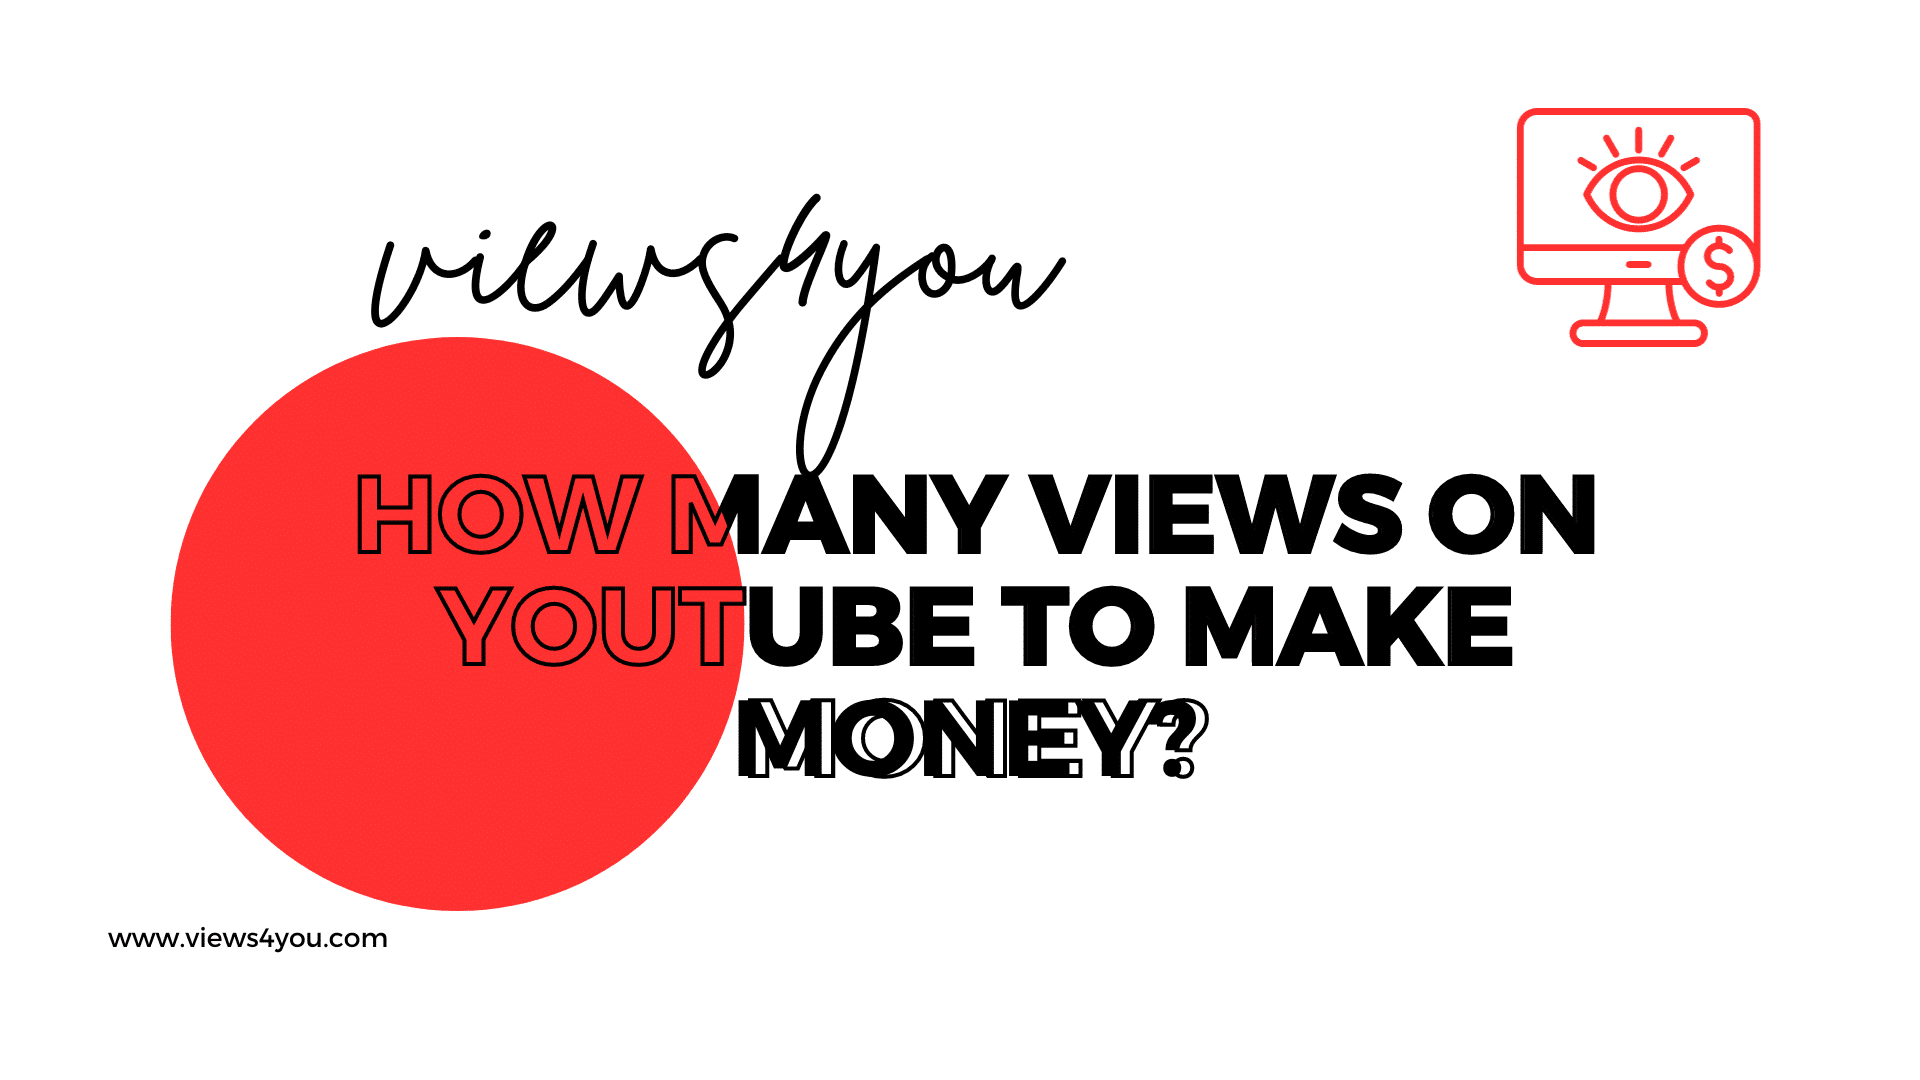 Views4You explains the number of views to make money.